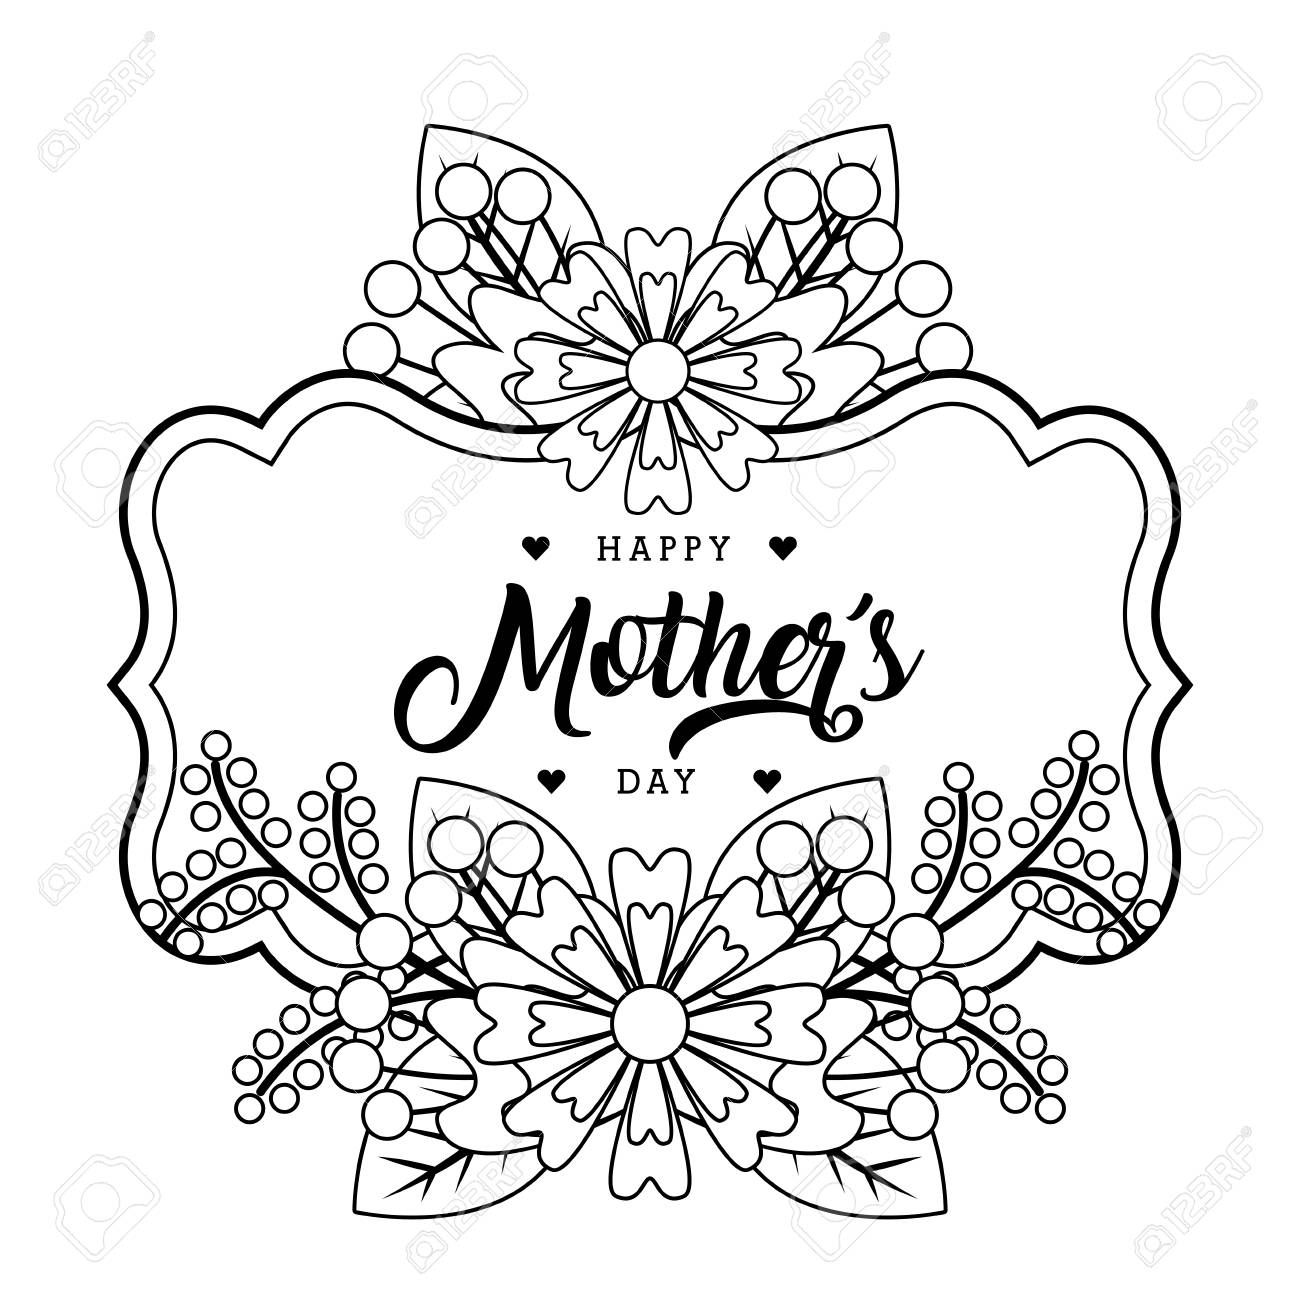 Happy mothers day card vintage decoration flowers outline vector illustration royalty free svg cliparts vectors and stock illustration image